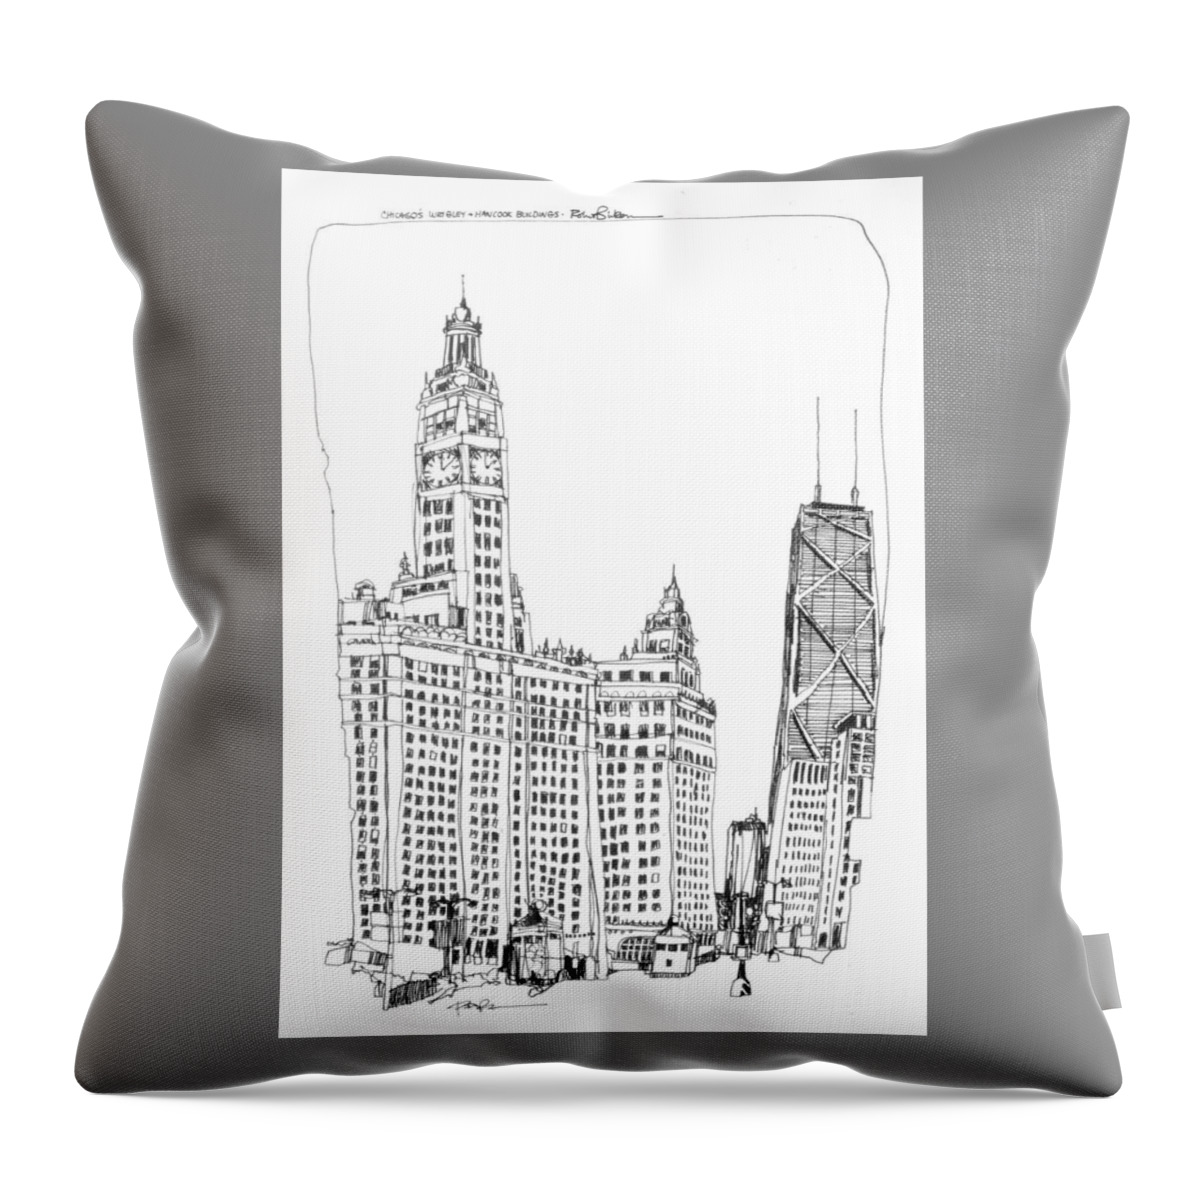 Chicago's Wrigley And Hancock Buildings Throw Pillow featuring the drawing Chicago Wrigley and Hancock Buildings by Robert Birkenes